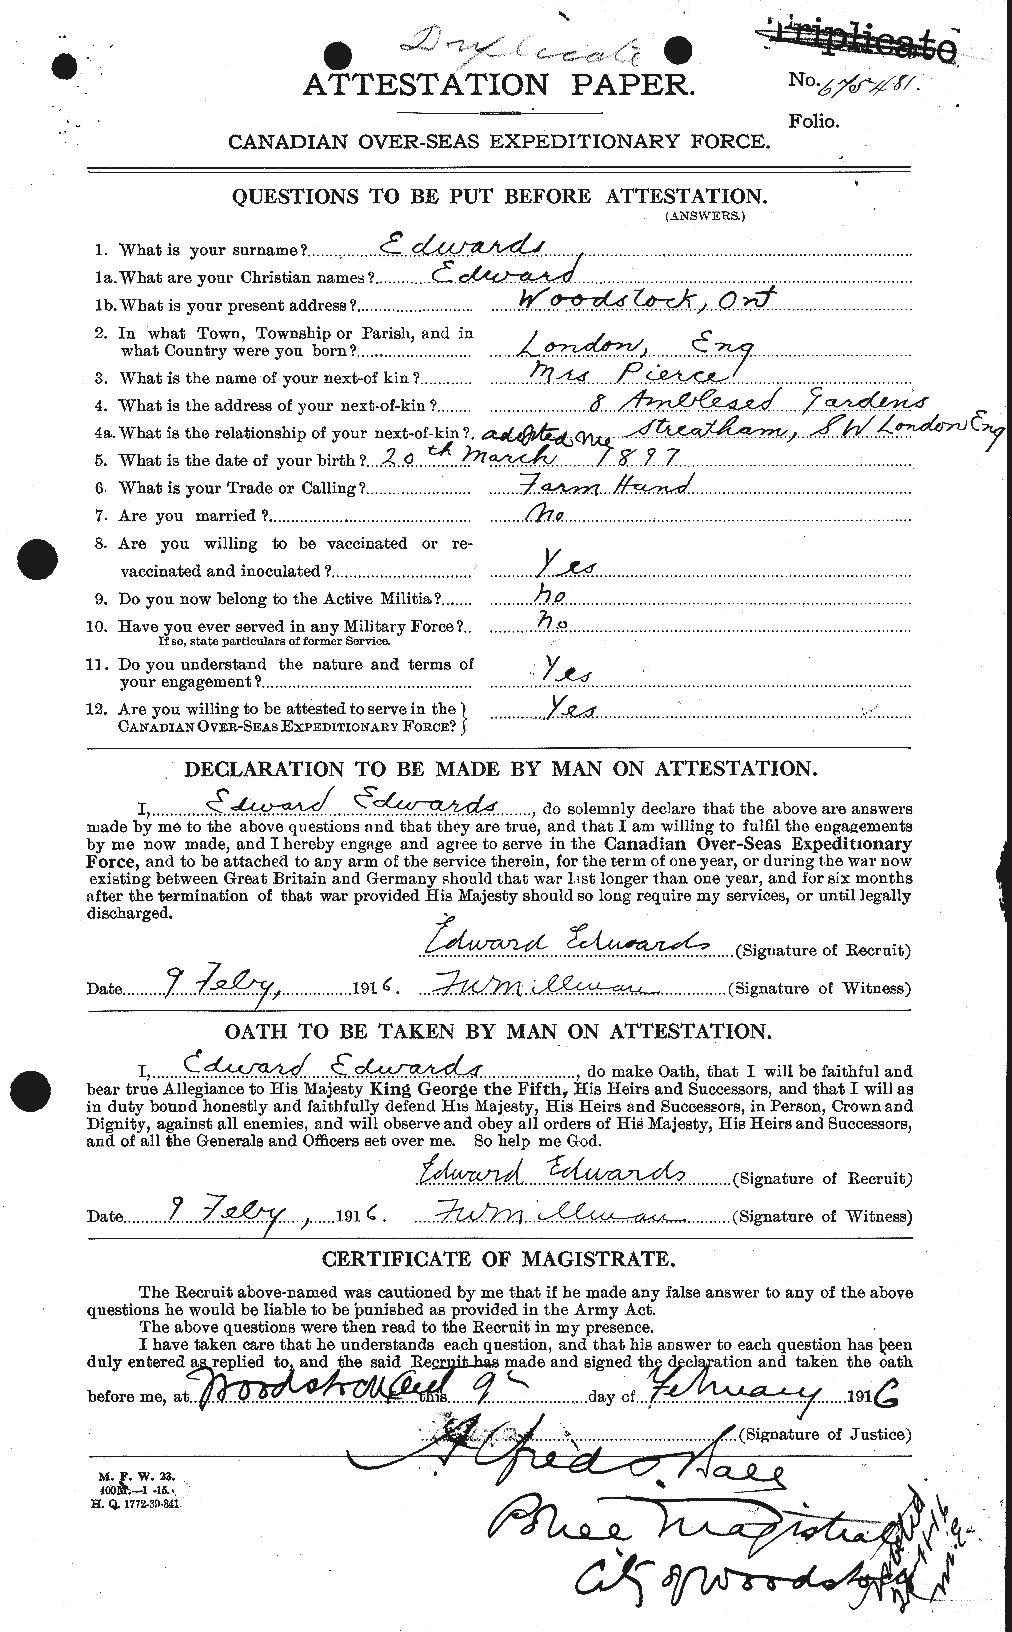 Personnel Records of the First World War - CEF 307894a